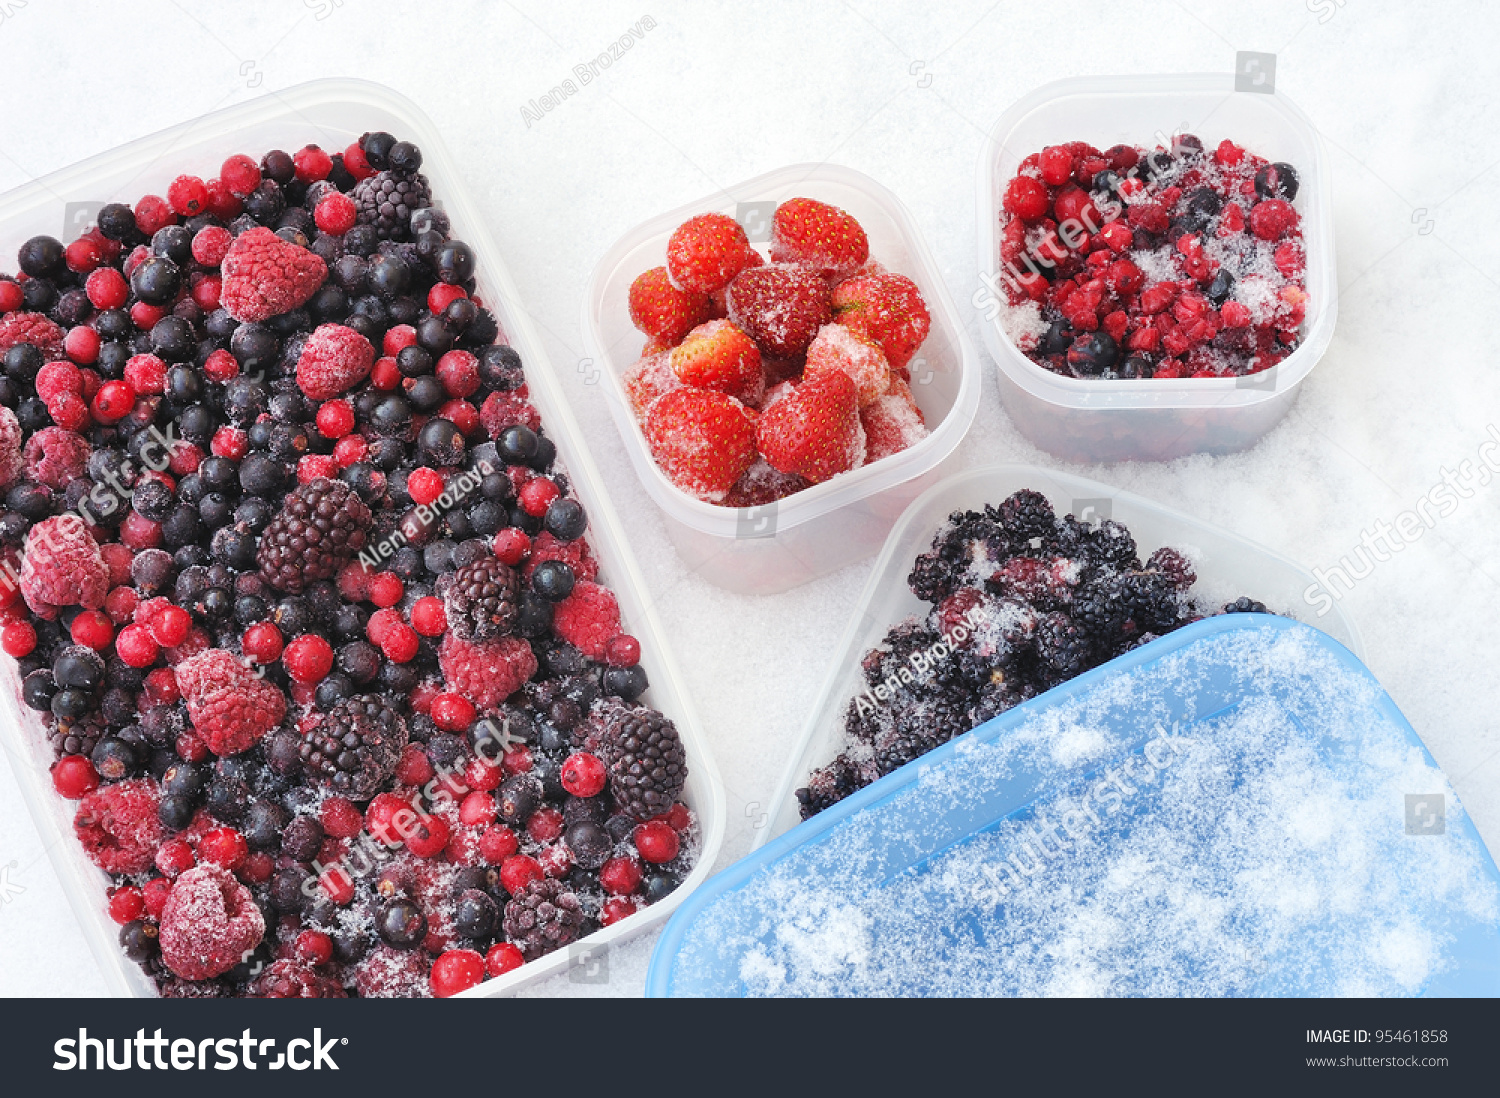 Download Plastic Containers Frozen Mixed Berries Snow Transportation Stock Image 95461858 PSD Mockup Templates